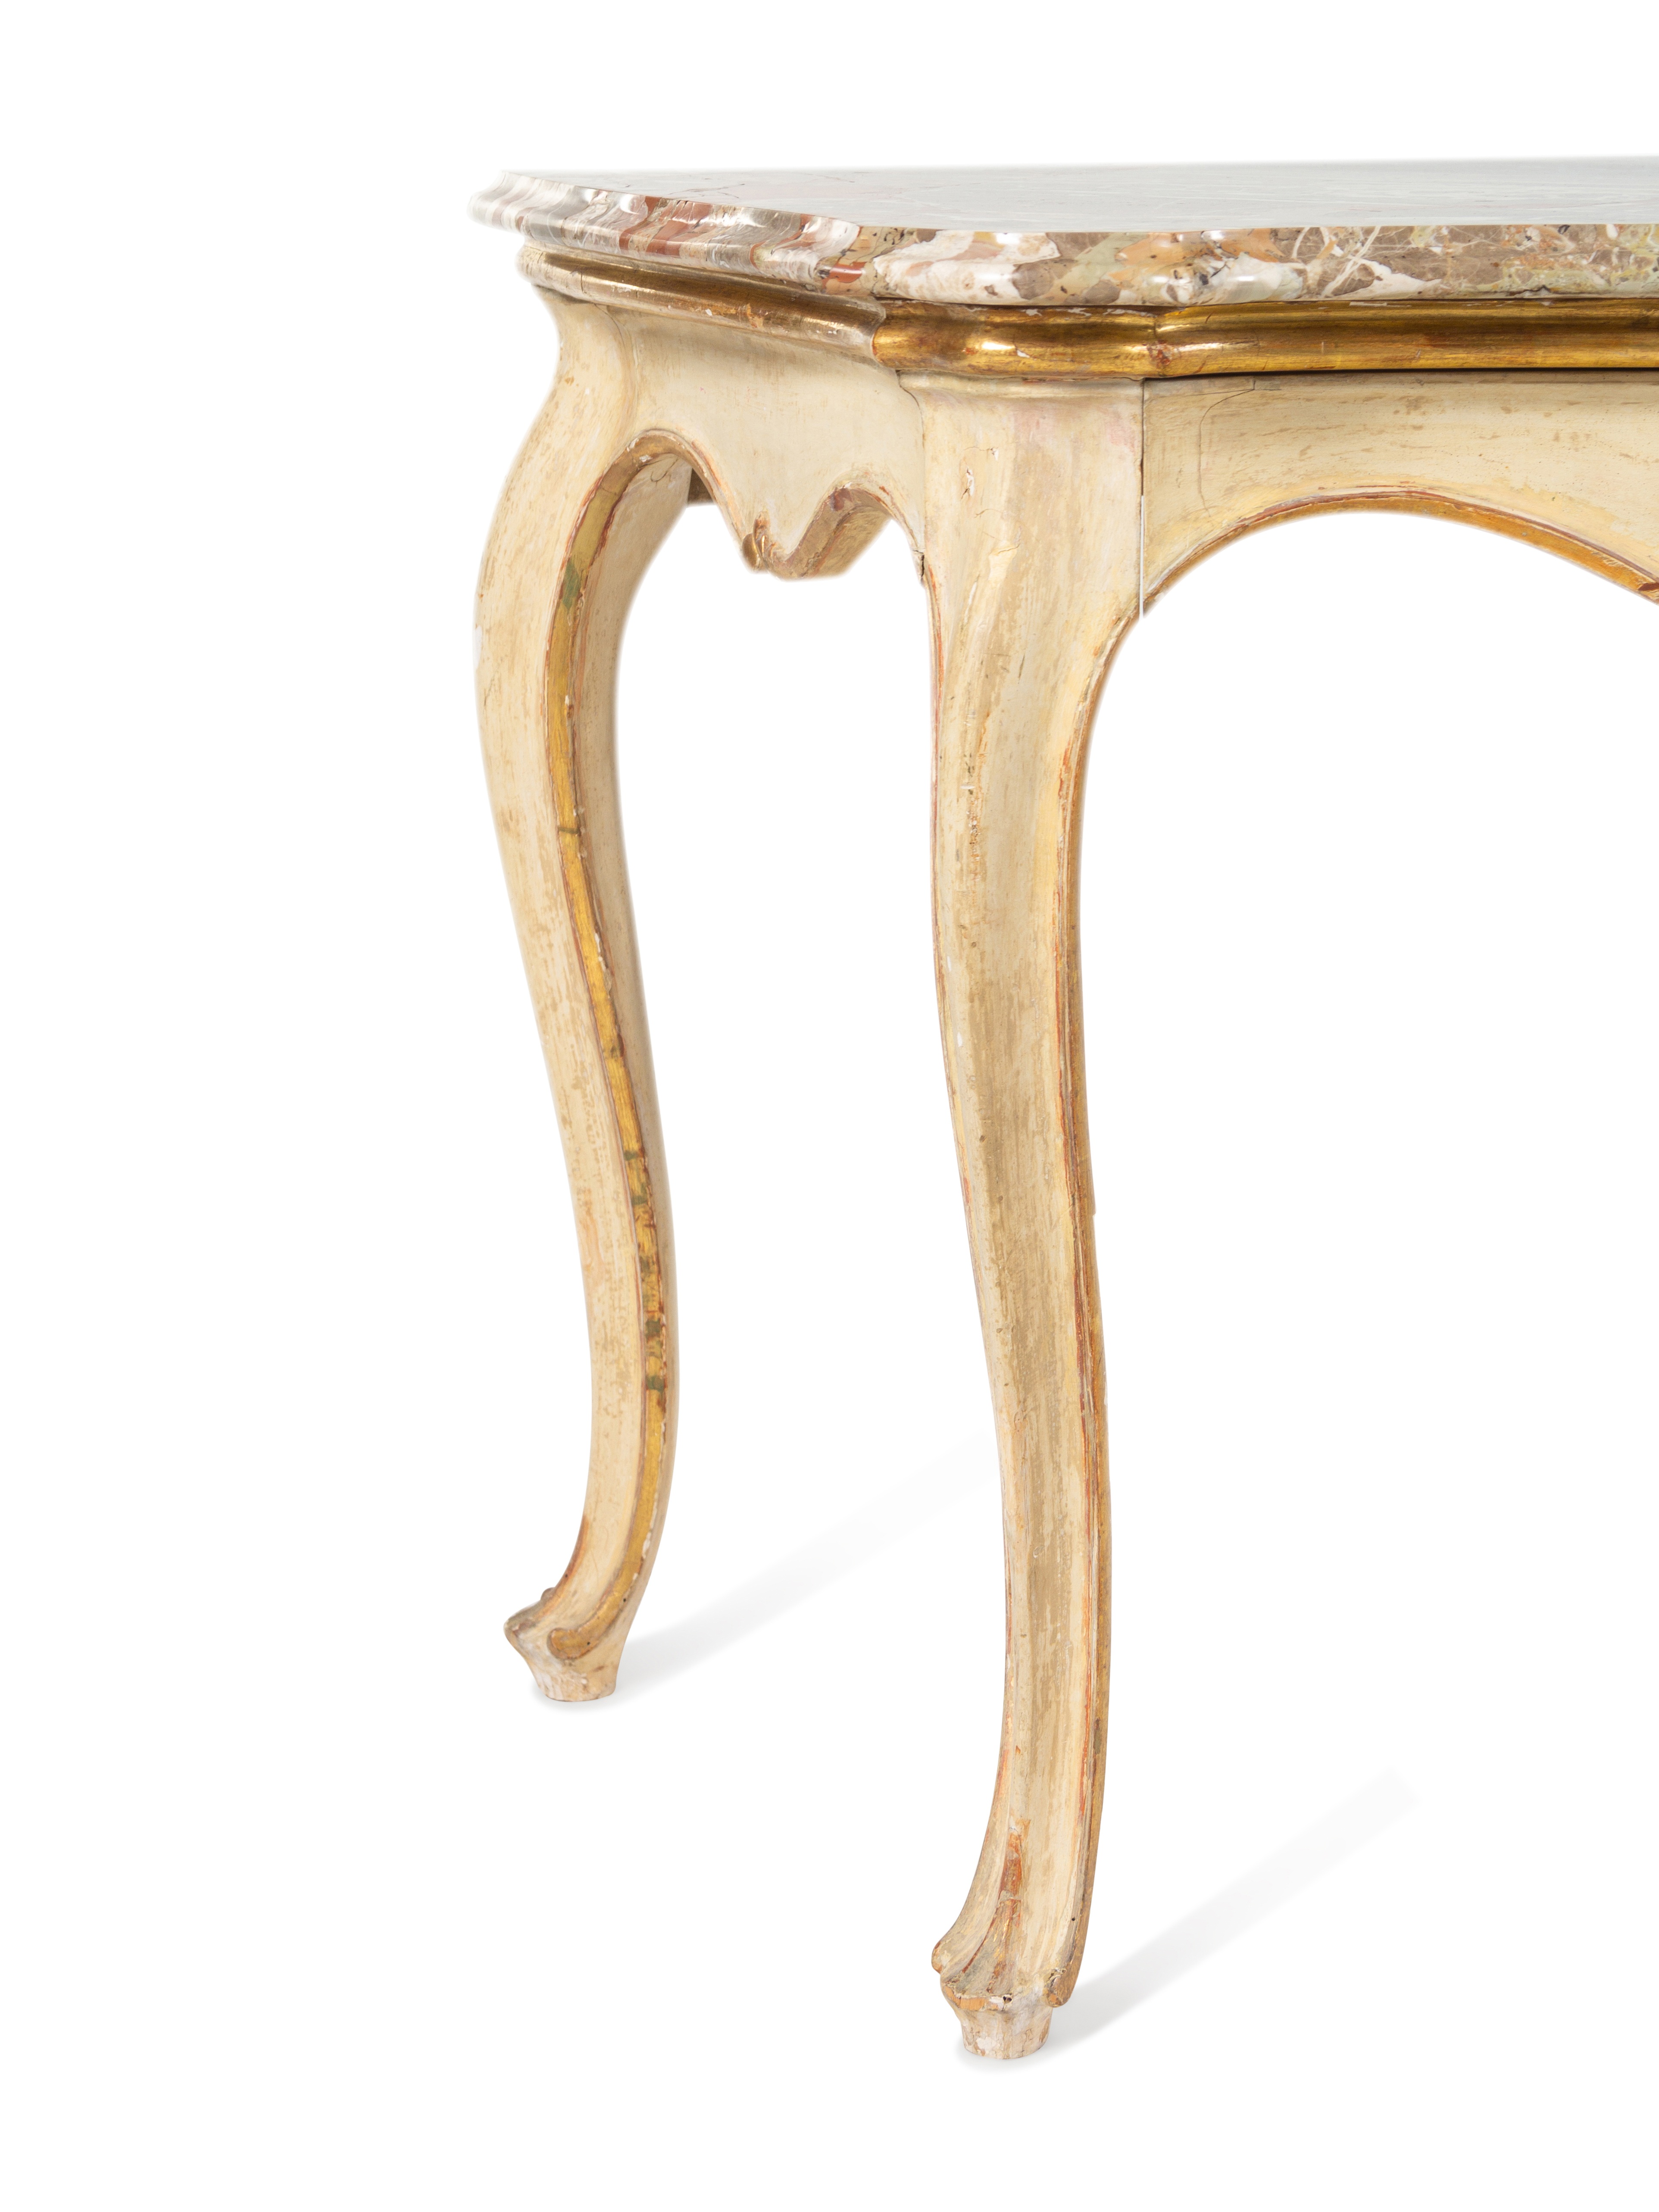 A Pair of Italian Painted and Parcel-Gilt Marble-Top Console Tables - Image 5 of 6